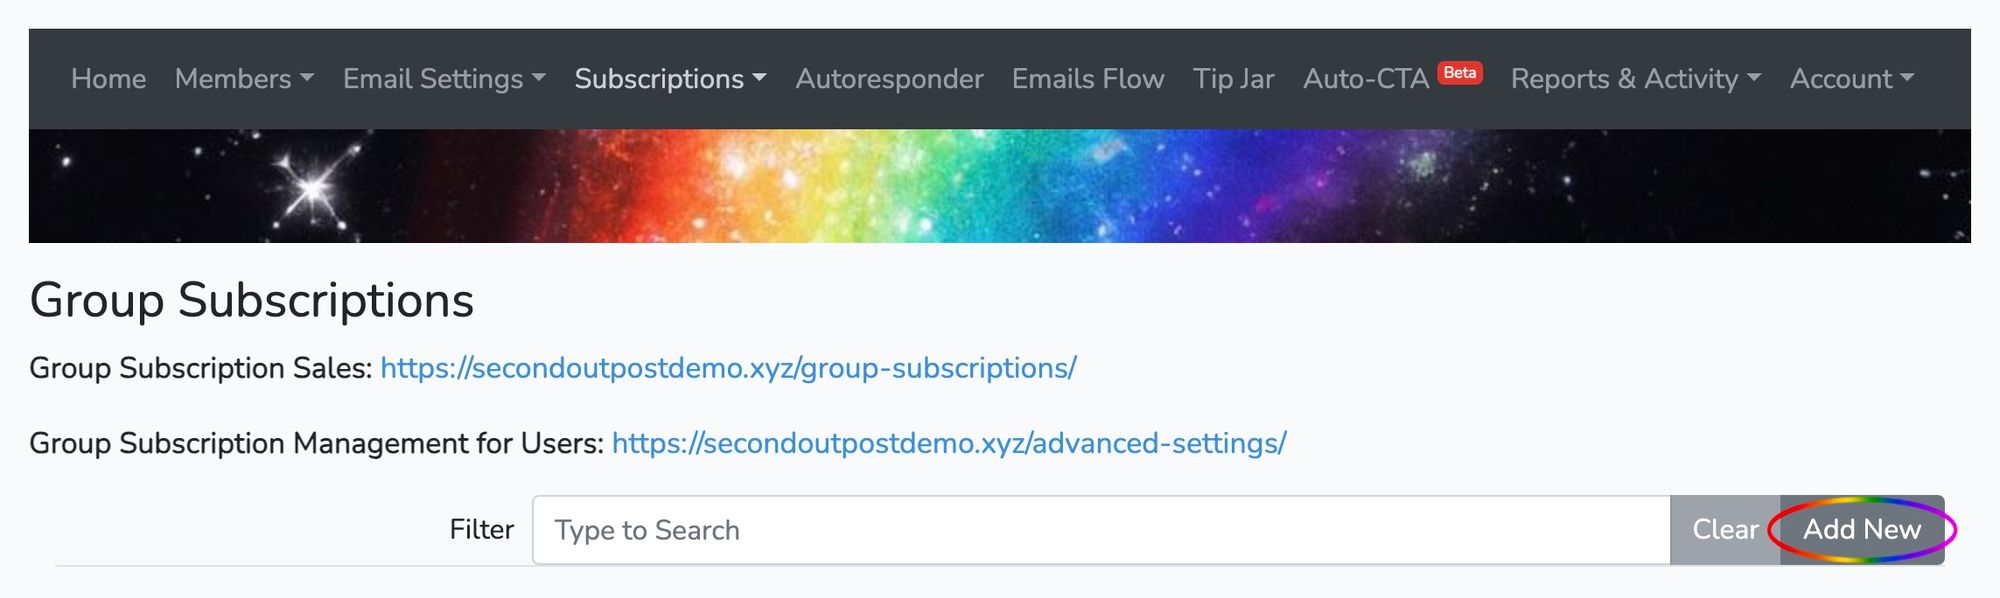 Group Subscriptions page with Add New circled